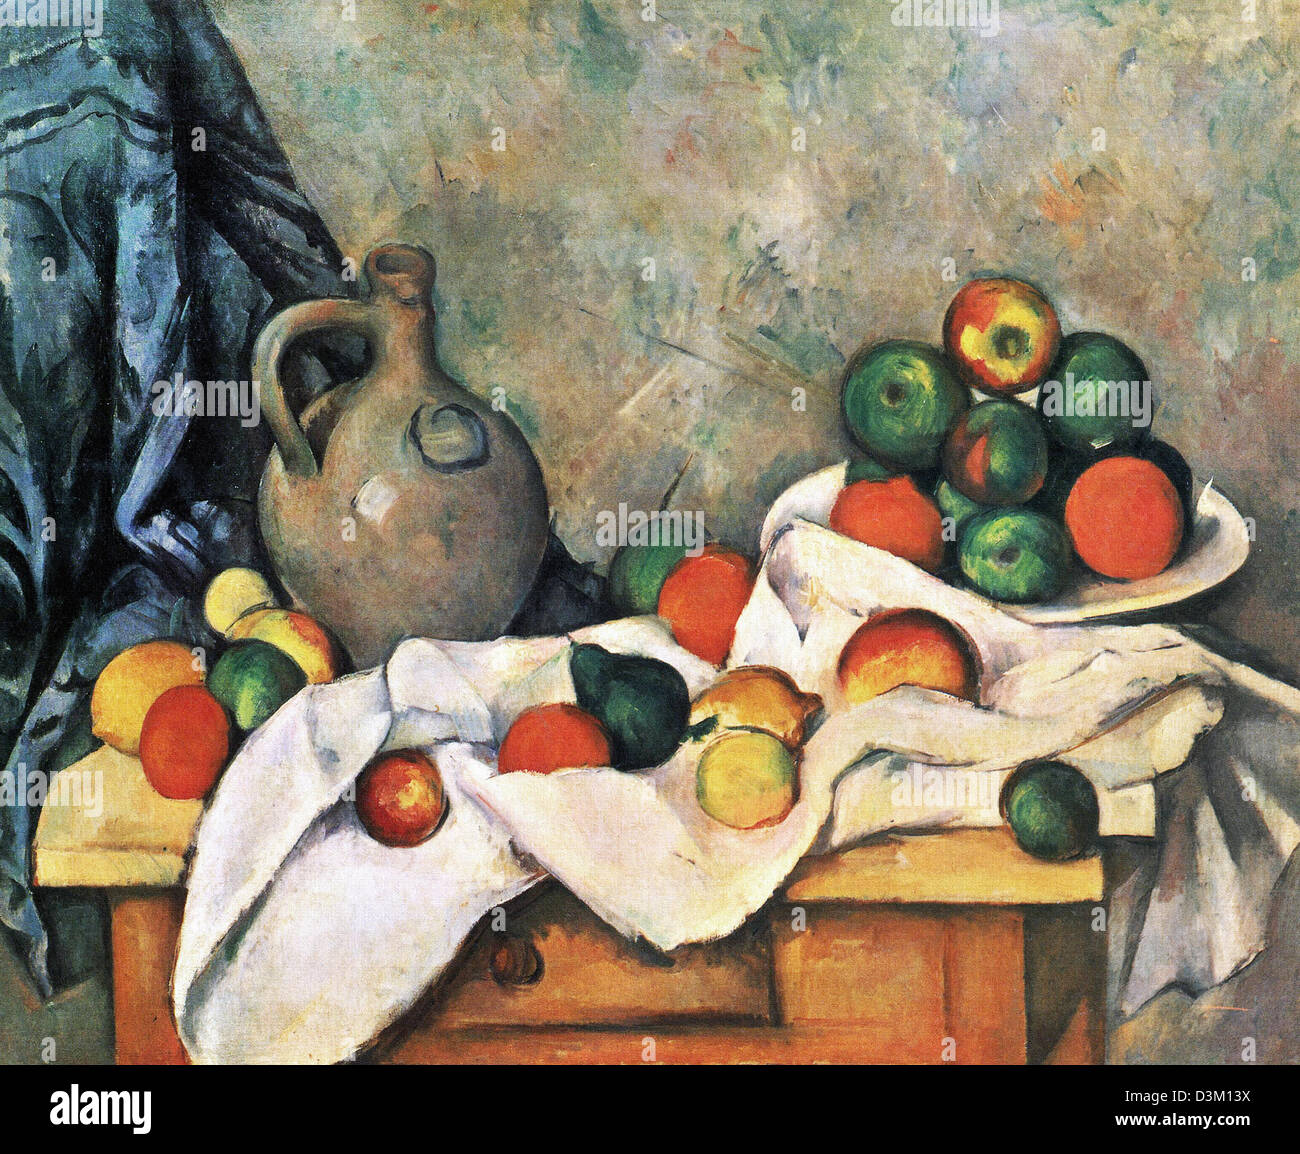 Paul Cezanne, Still Life, Drapery, Pitcher, and Fruit Bowl 1893-94 Oil on canvas. Whitney Museum of American Art, New York, USA Stock Photo